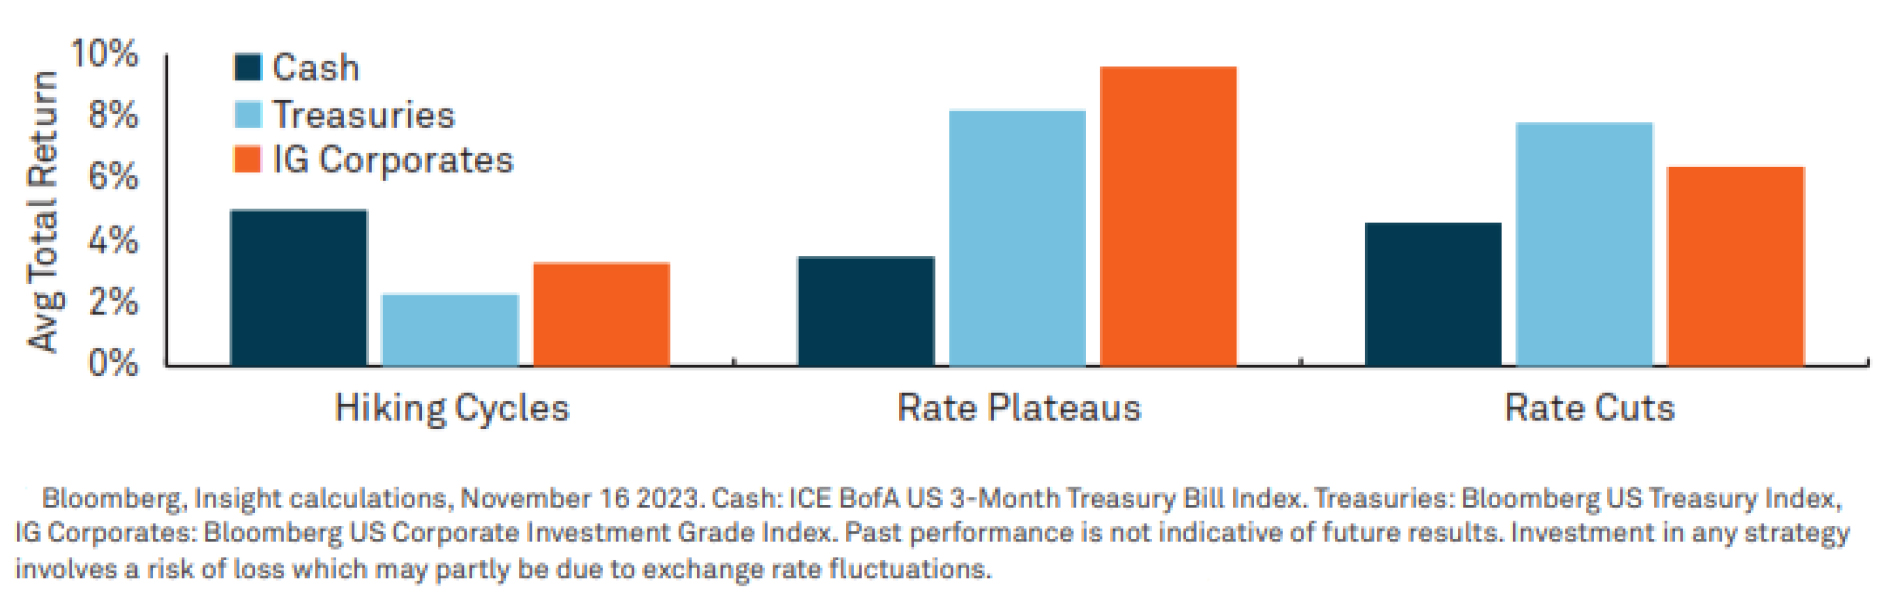 Graph showing average total return rates for cash, Treasuries and investment grade corporate bonds